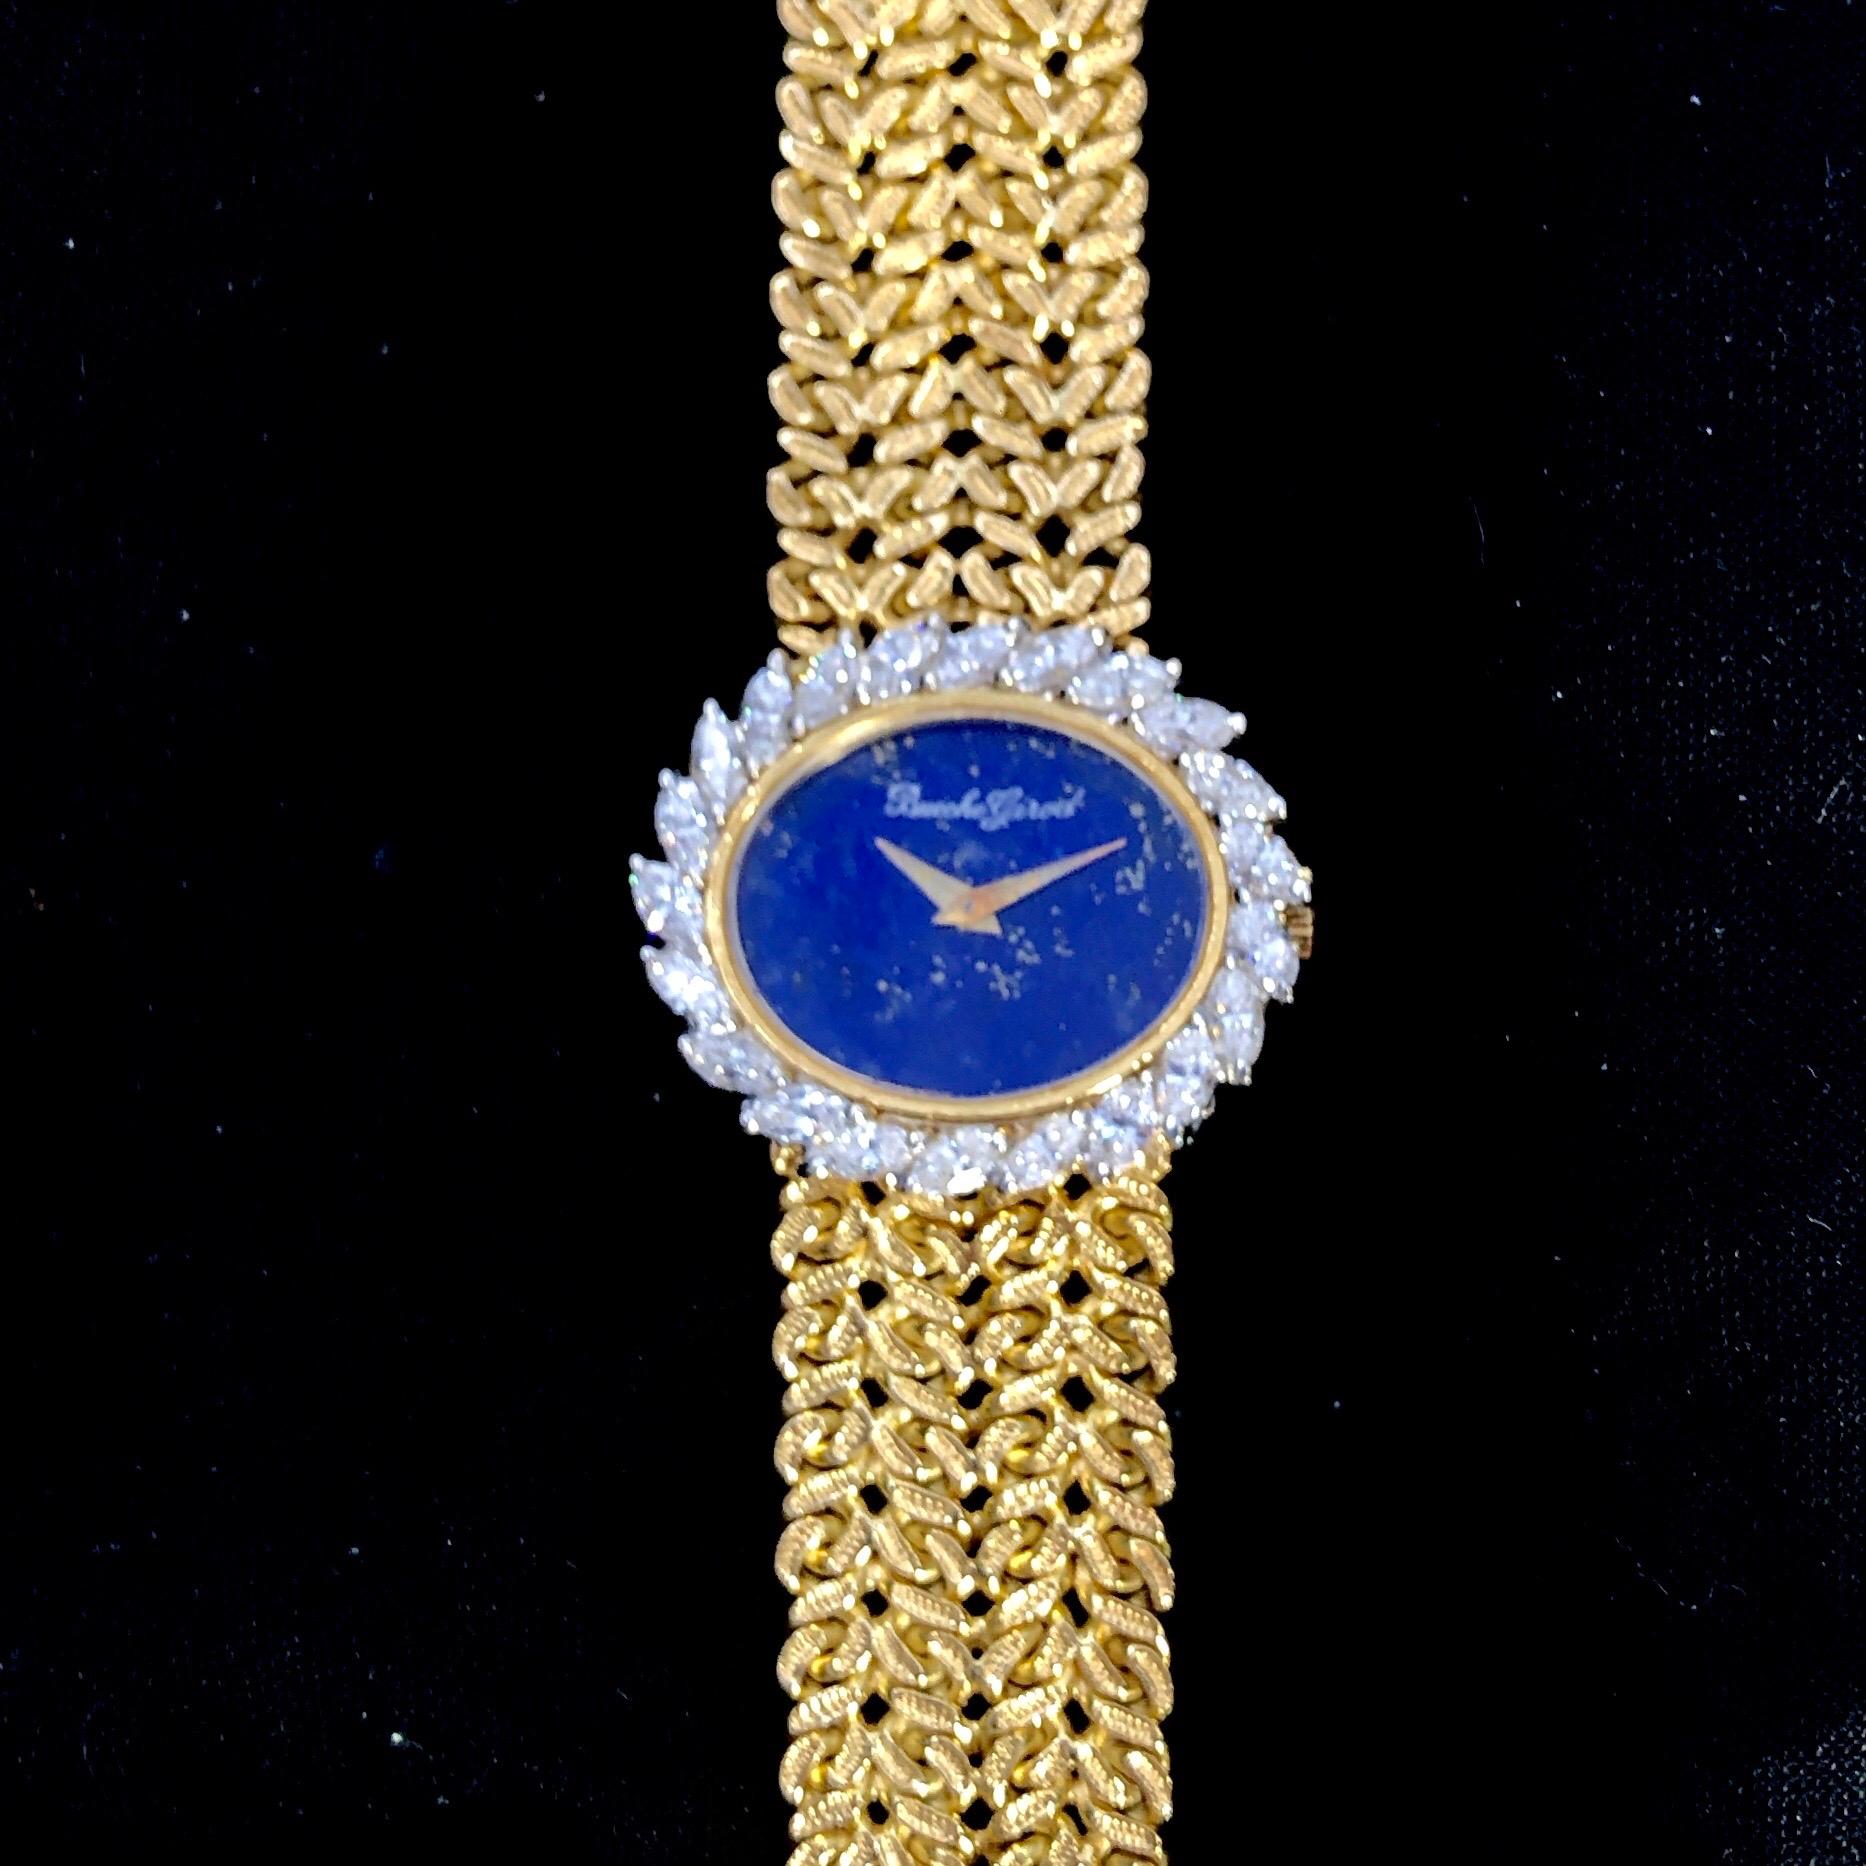 This lovely vintage timepiece was created in Geneva Switzerland. The vivid blue Lapis dial is flecked with Pyrite and Calcite, both of which are signature characteristics for this natural hardstone. The movement is an ultra thin high grade